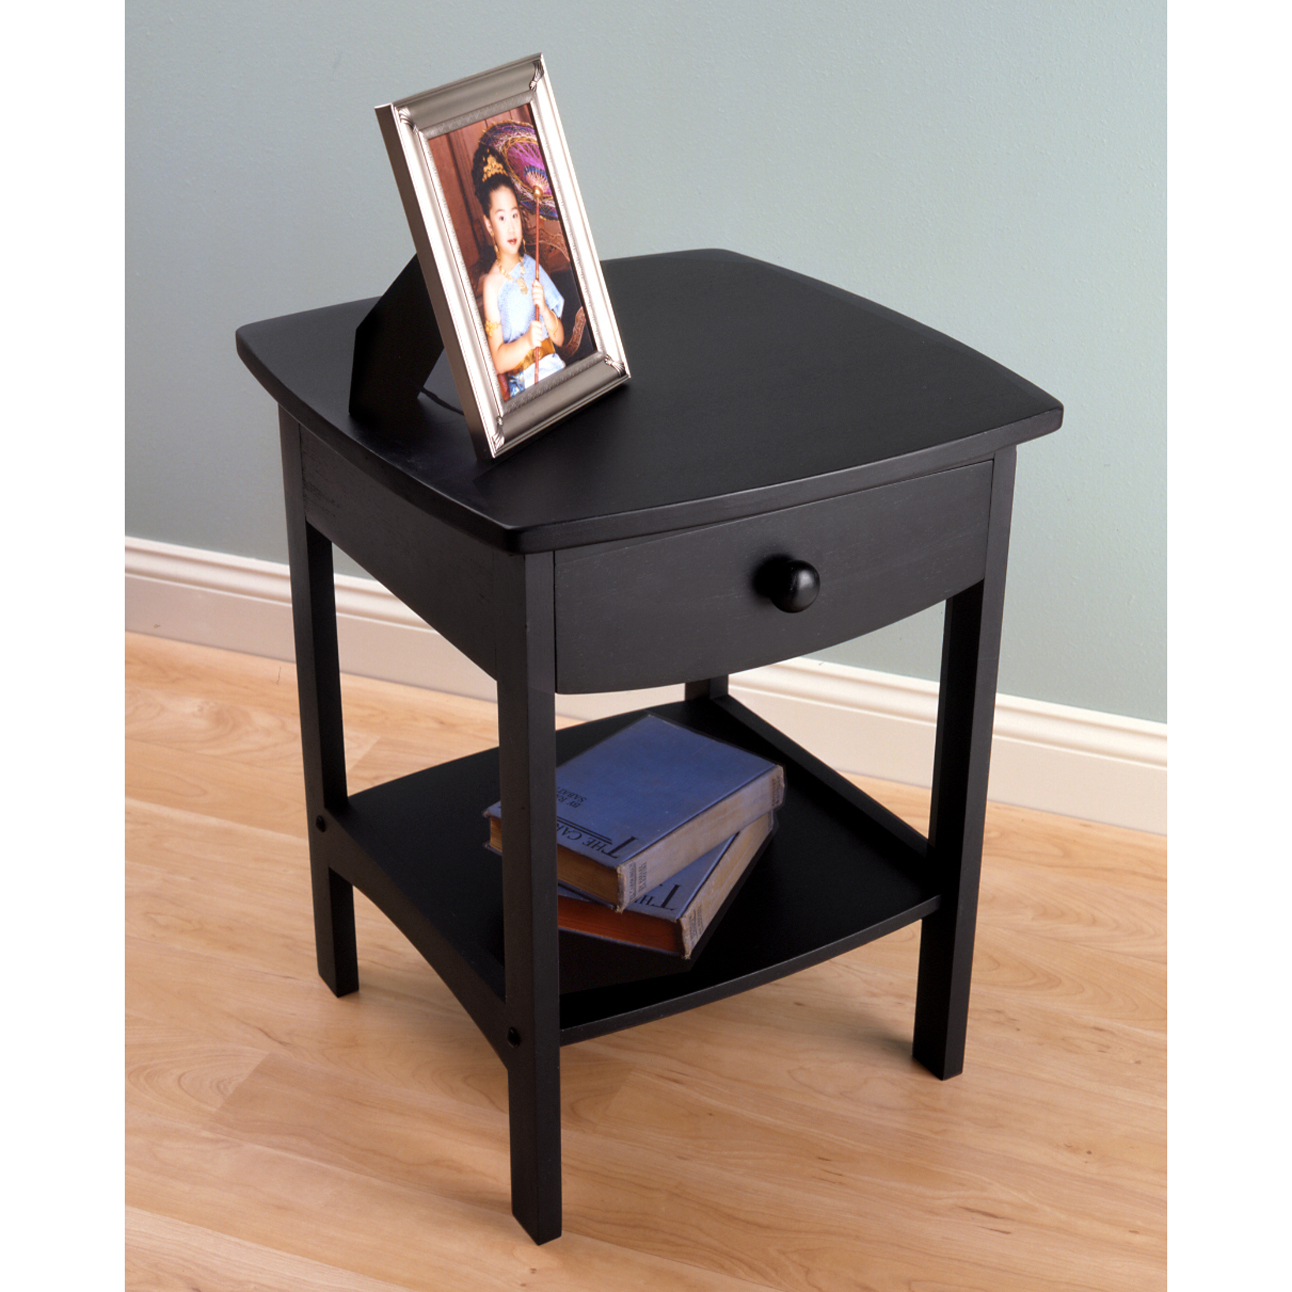 winsome trading curved drawer nightstand end table eugene accent walnut battery powered led reading lamp wire basket living room center decor black metal and wood coffee armless